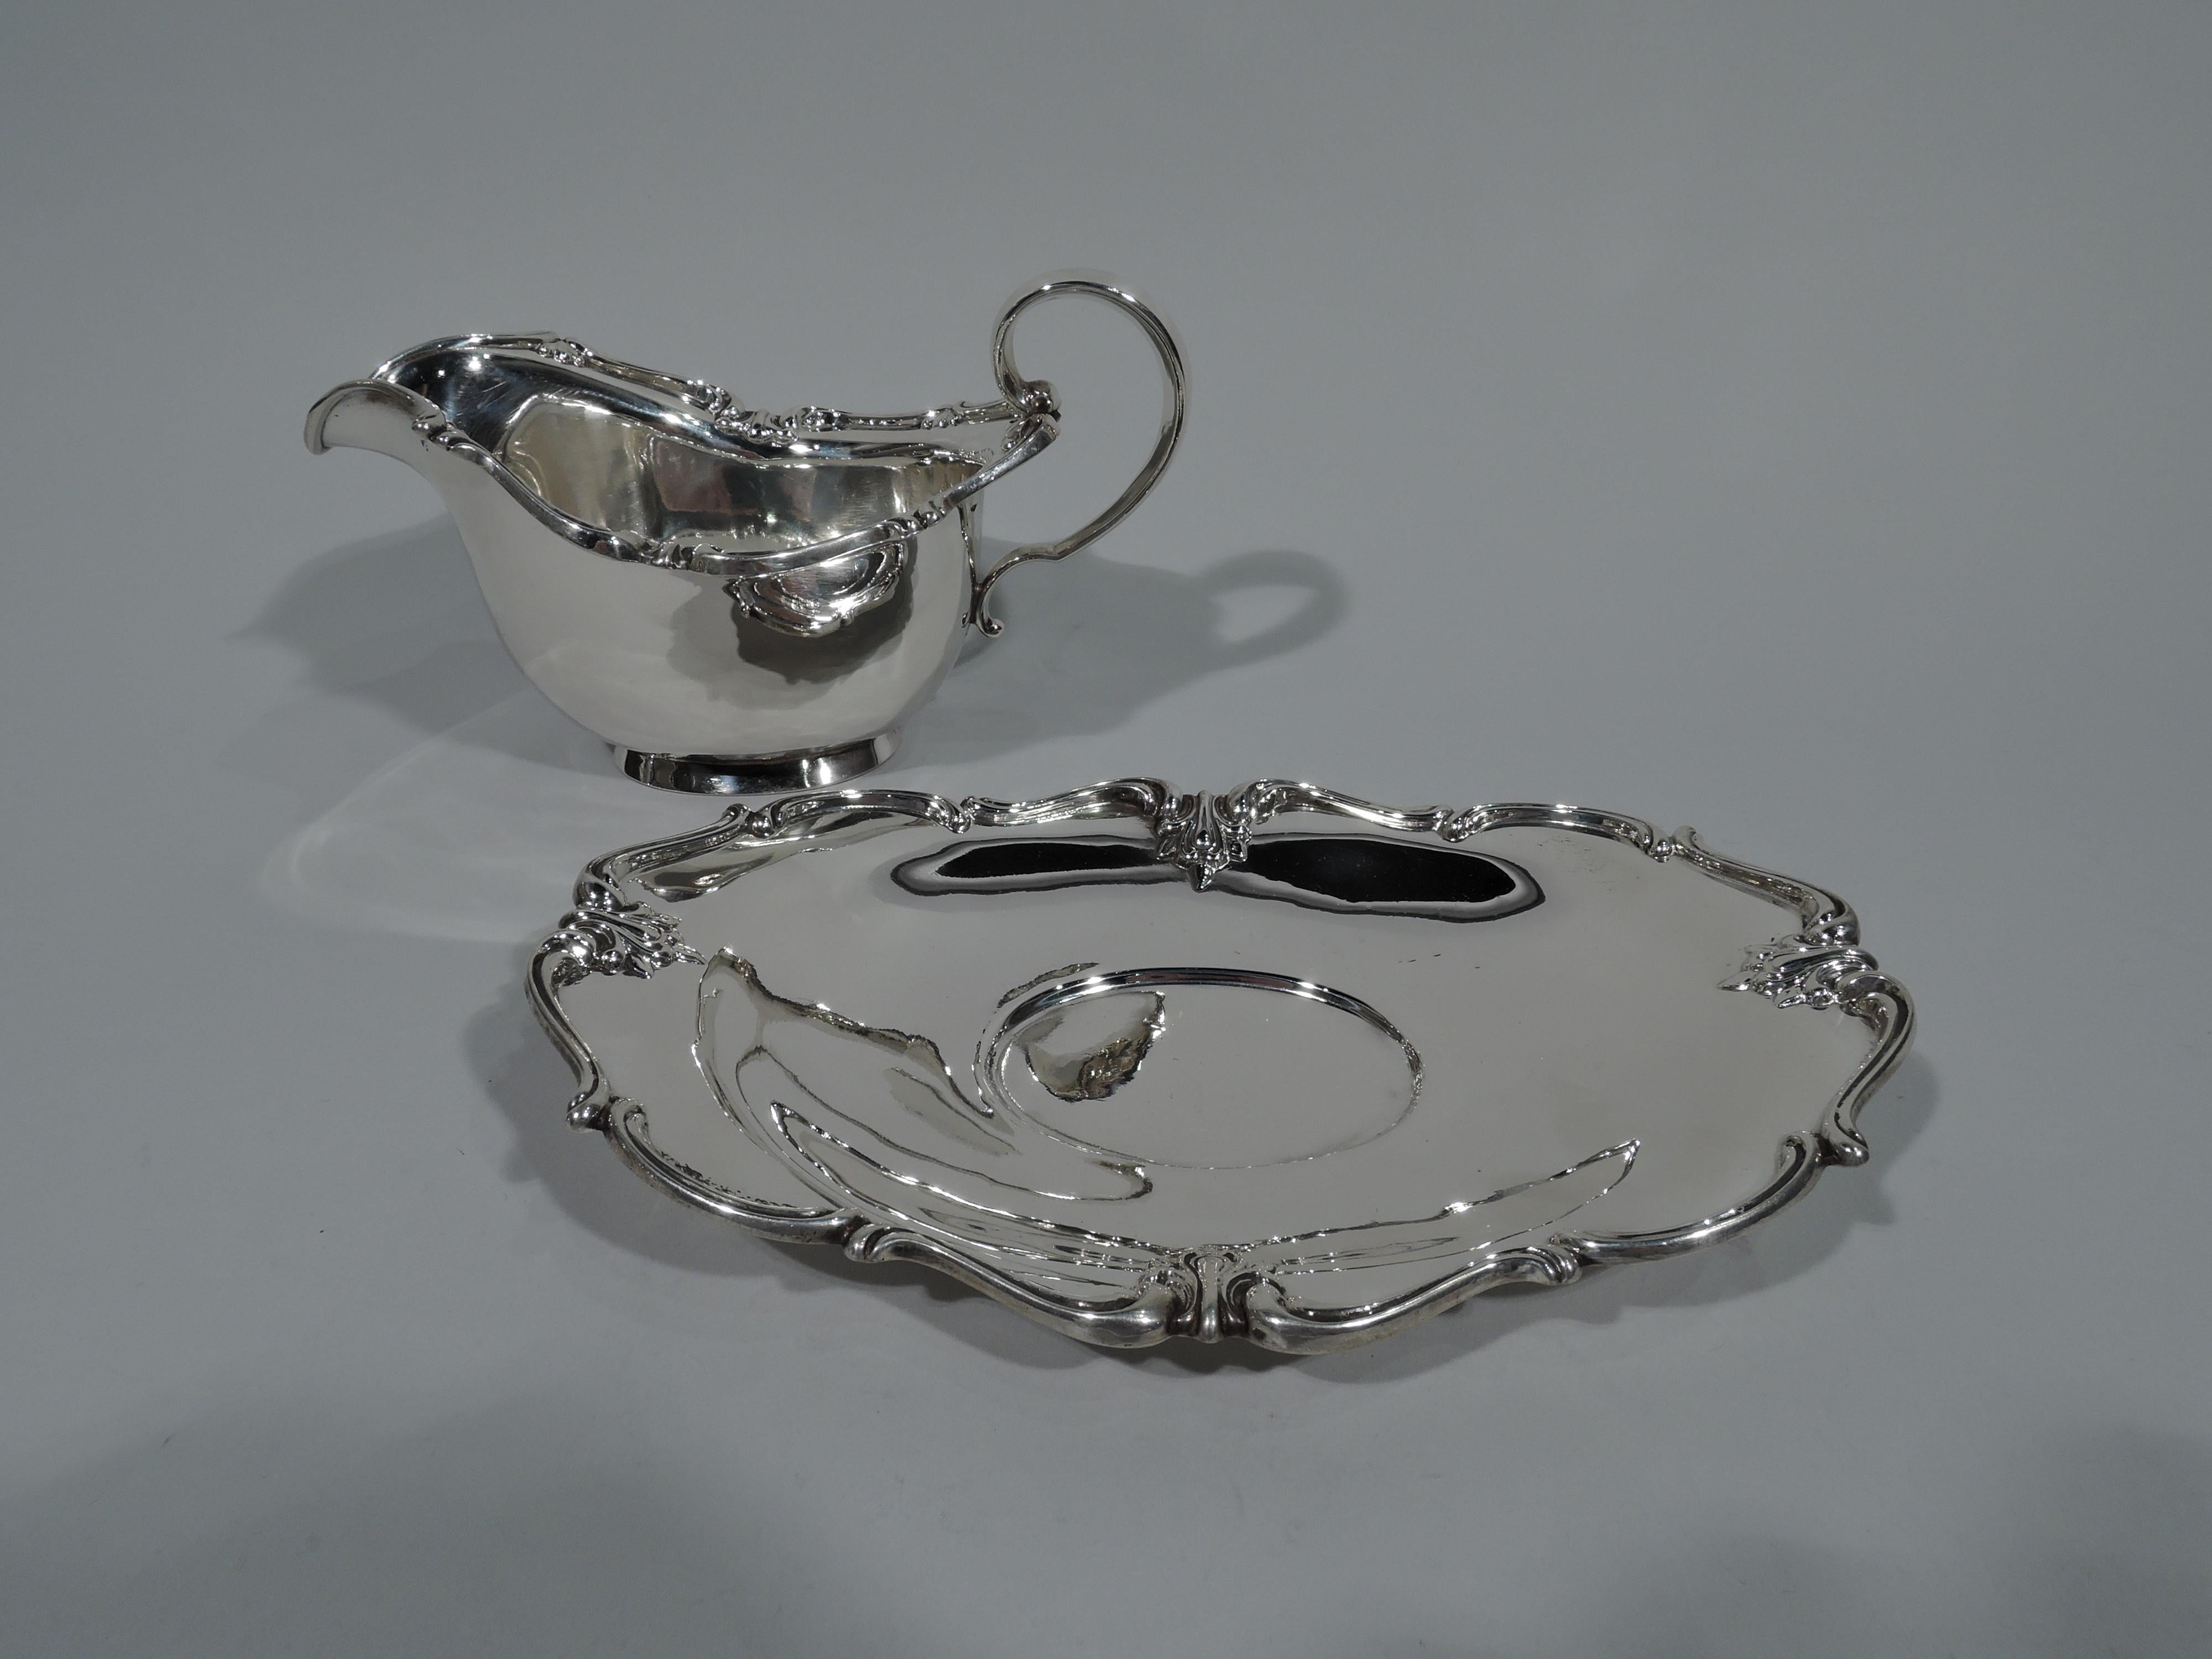 Pretty sterling silver gravy boat. Made by Frank M. Whiting in North Attleboro, Mass., circa 1940. Boat: Curved sides, high looping scroll handle, and short splayed foot. Ruffly asymmetrical rim with scrolls and leaves. Stand: Curved with foot ring.